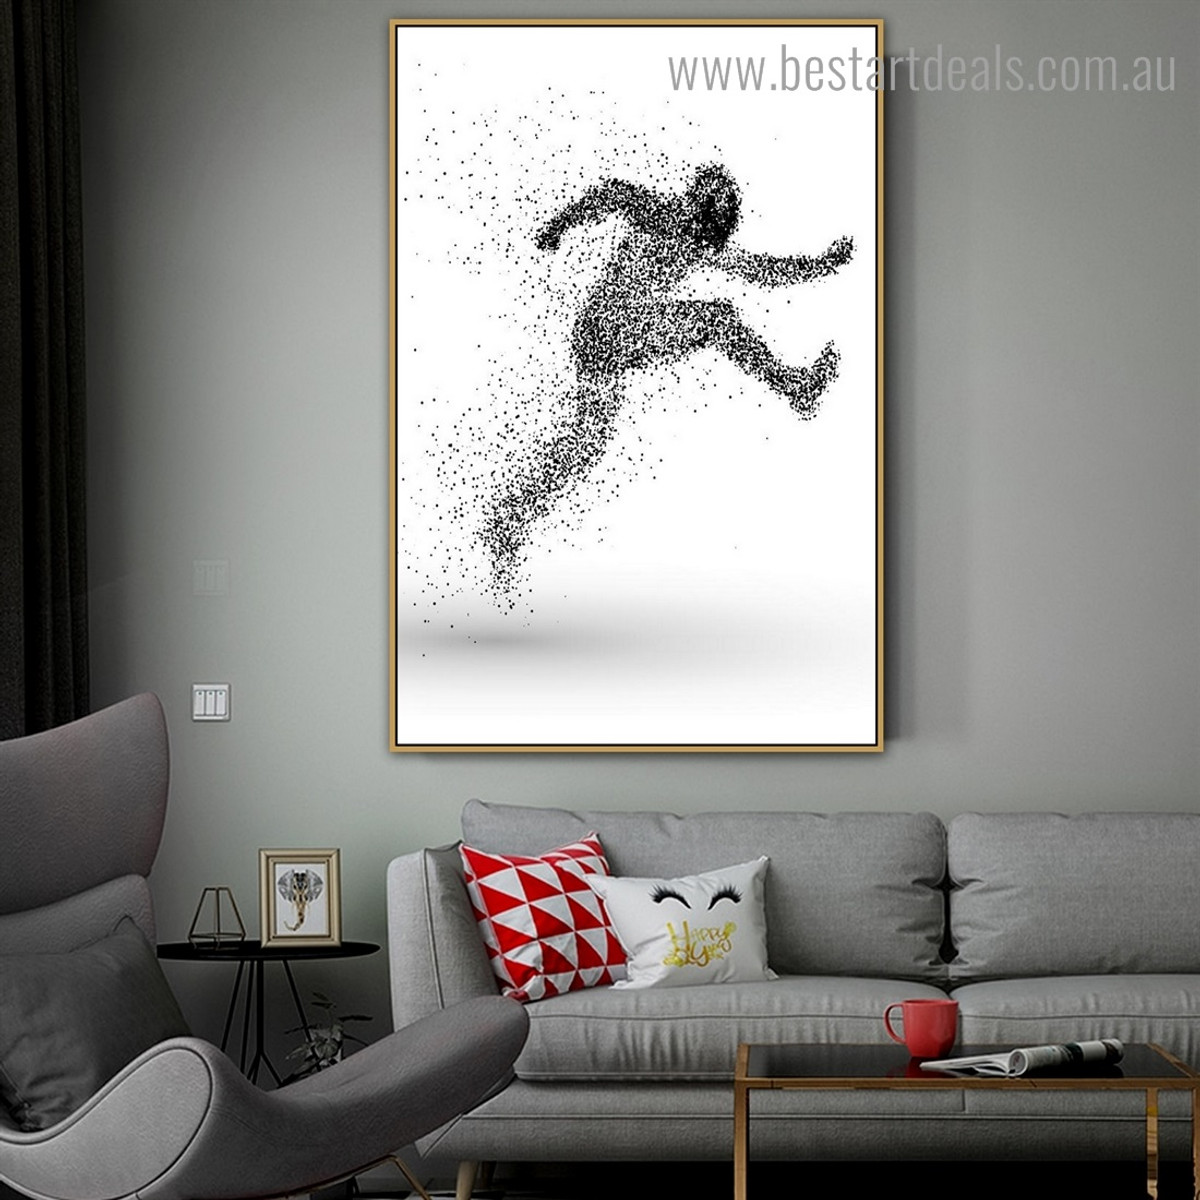 Jumping Abstract Illustration Modern Framed Artwork Portrait Canvas Print for Room Wall Decoration